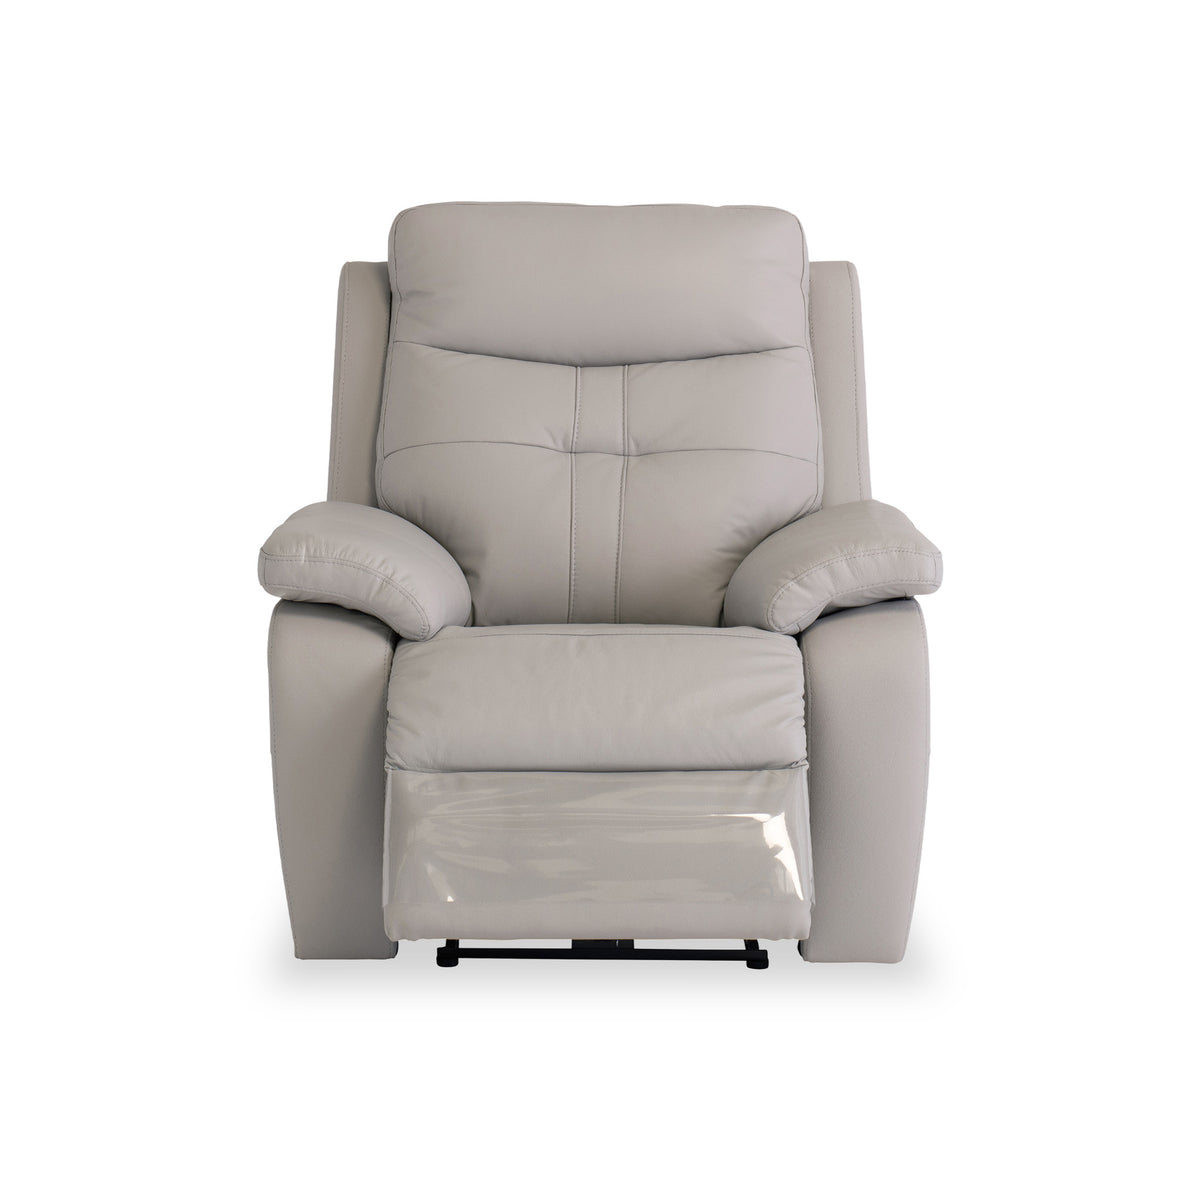 Talbot Charcoal Light Light Grey Leather Electric Reclining Armchair from Roseland Furniture